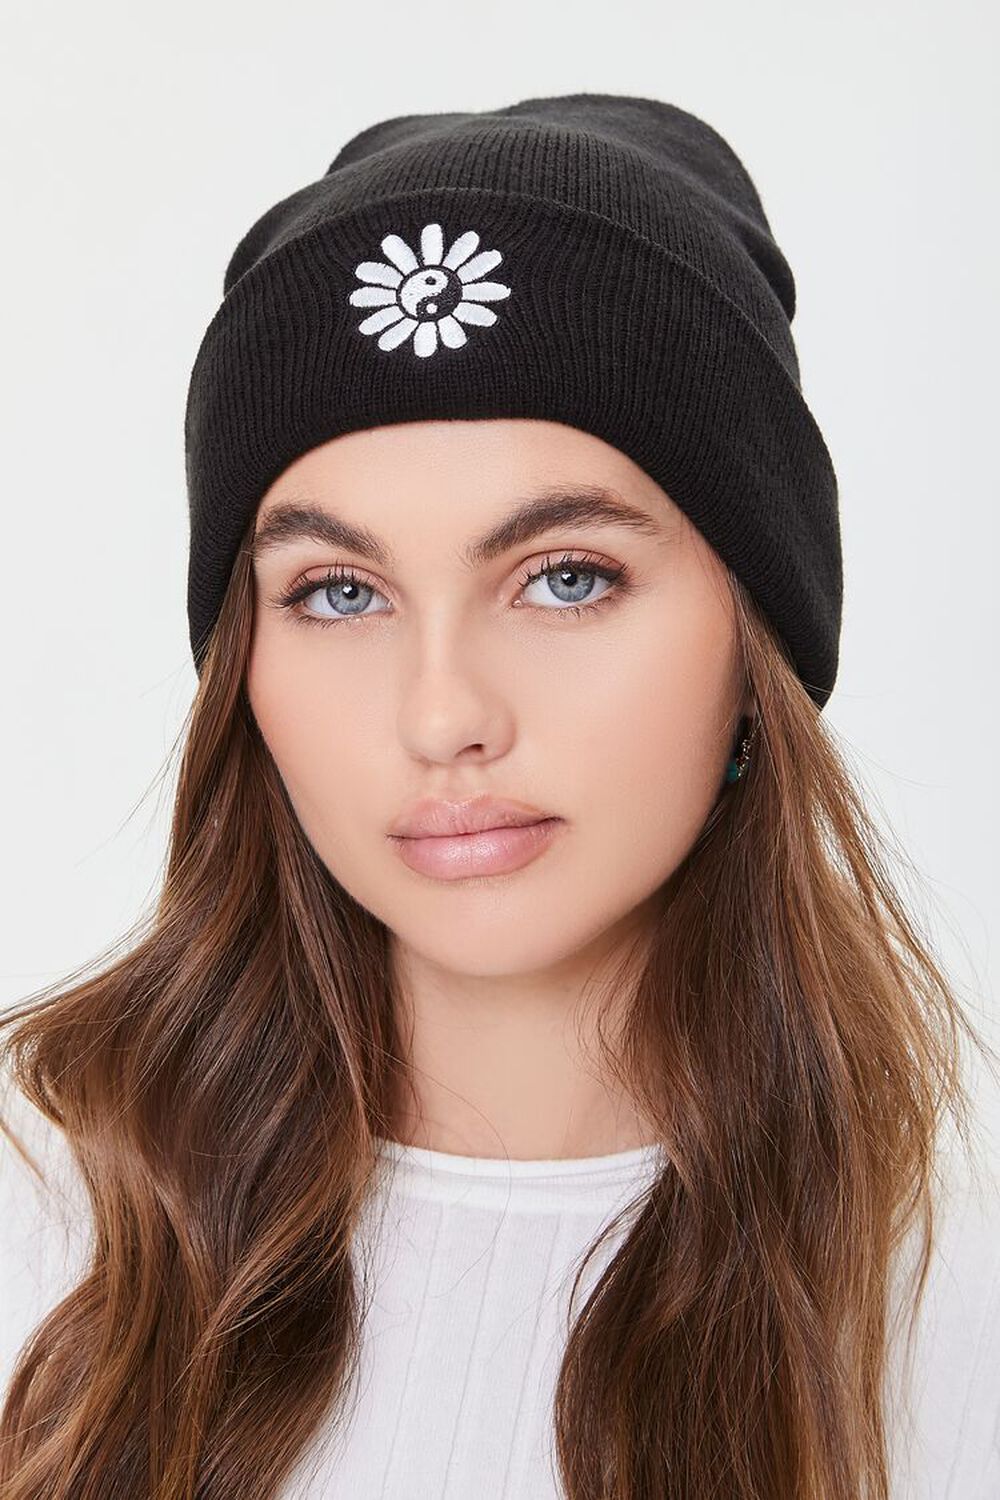 BLACK/MULTI Embroidered Yin Yang Flower Beanie, image 1